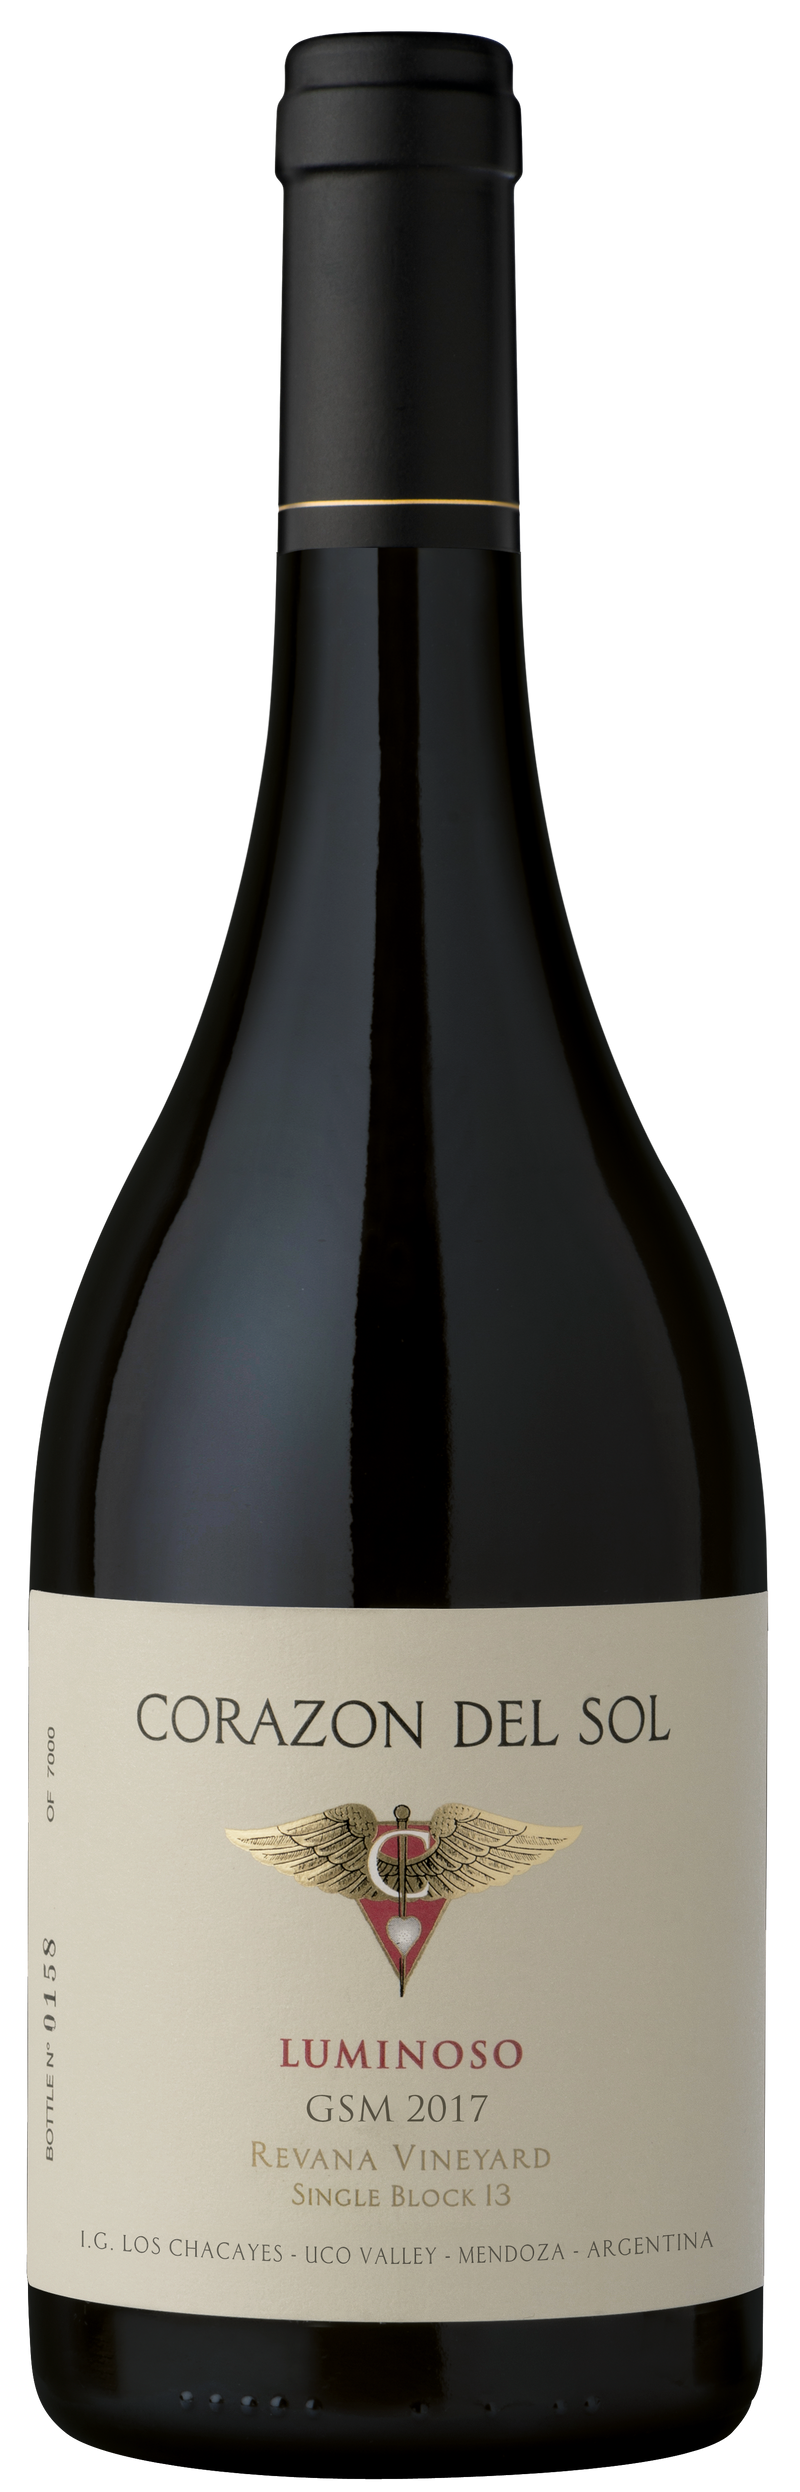 Corazon del Sol, Luminoso GSM, Rhone Red Blend, Uco Valley, 2017